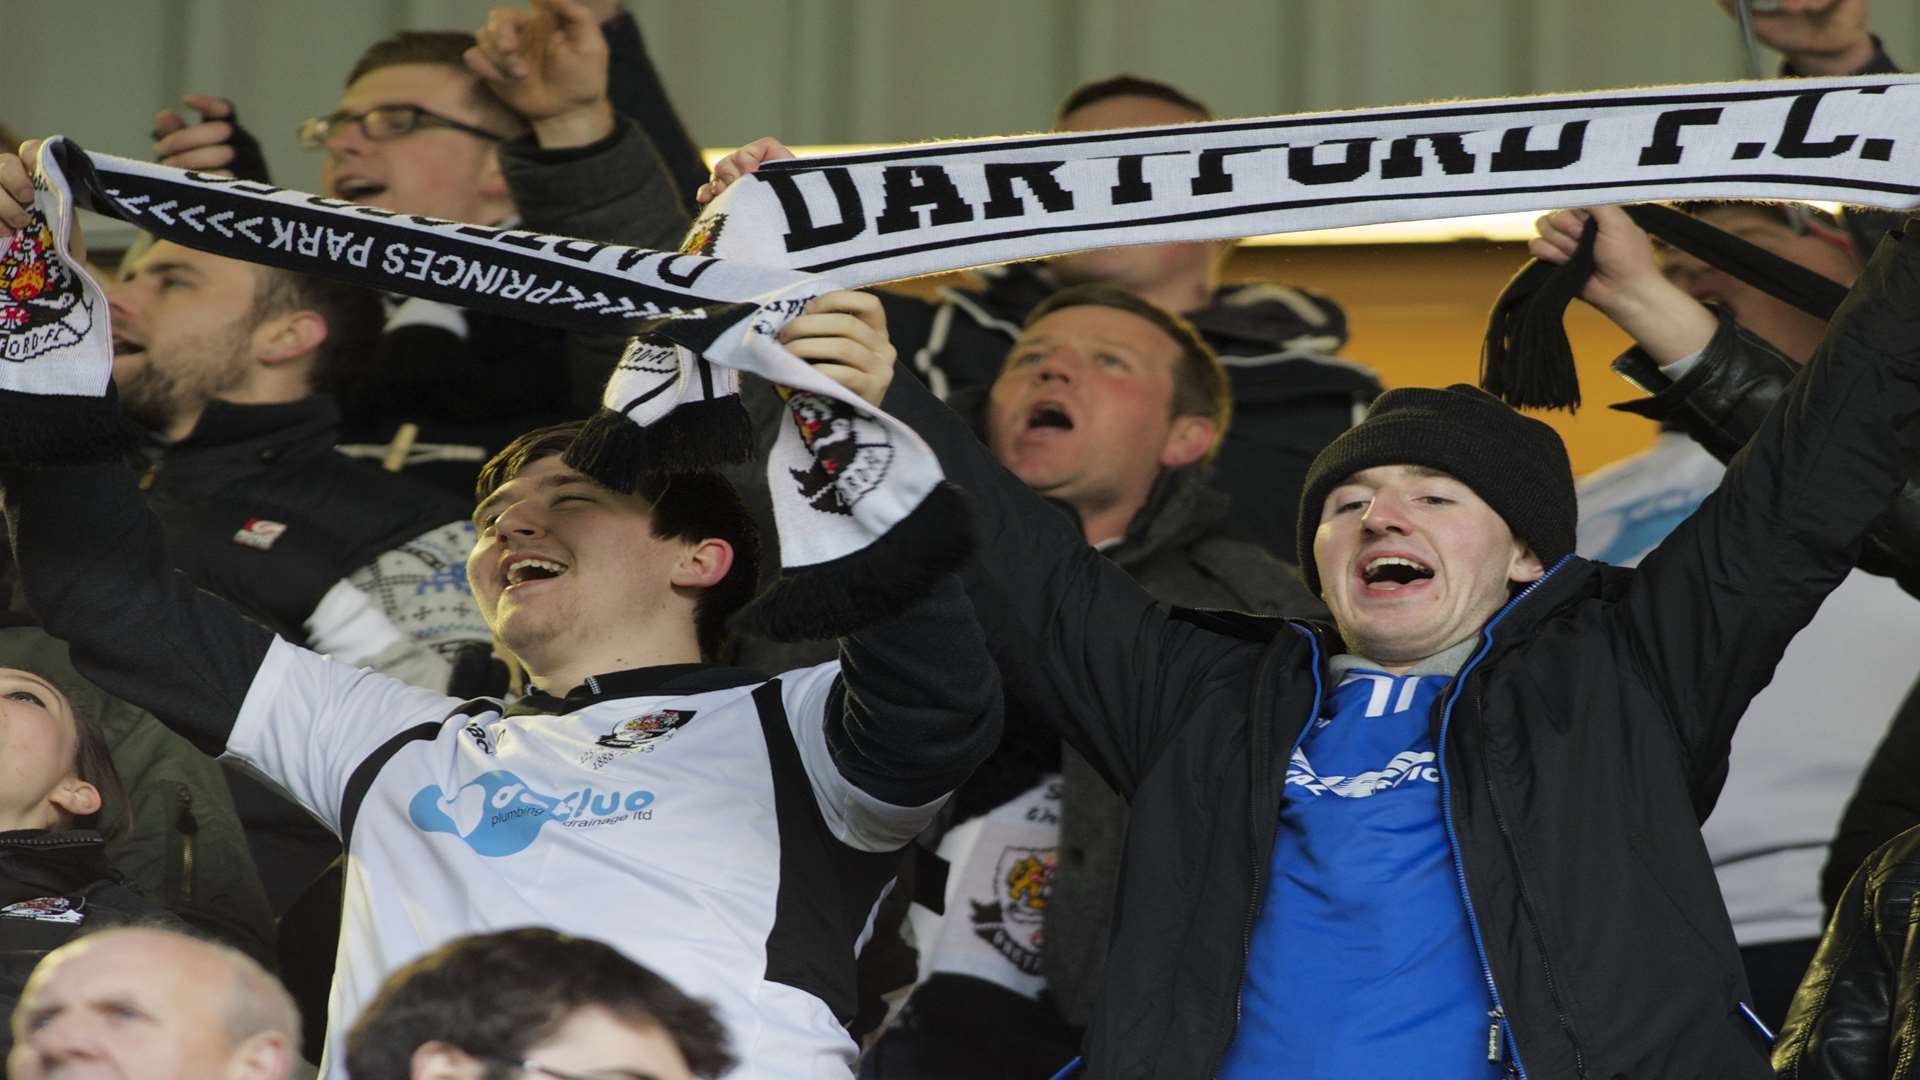 Dartford fans in full voice at Valley Parade Picture: Andy Payton